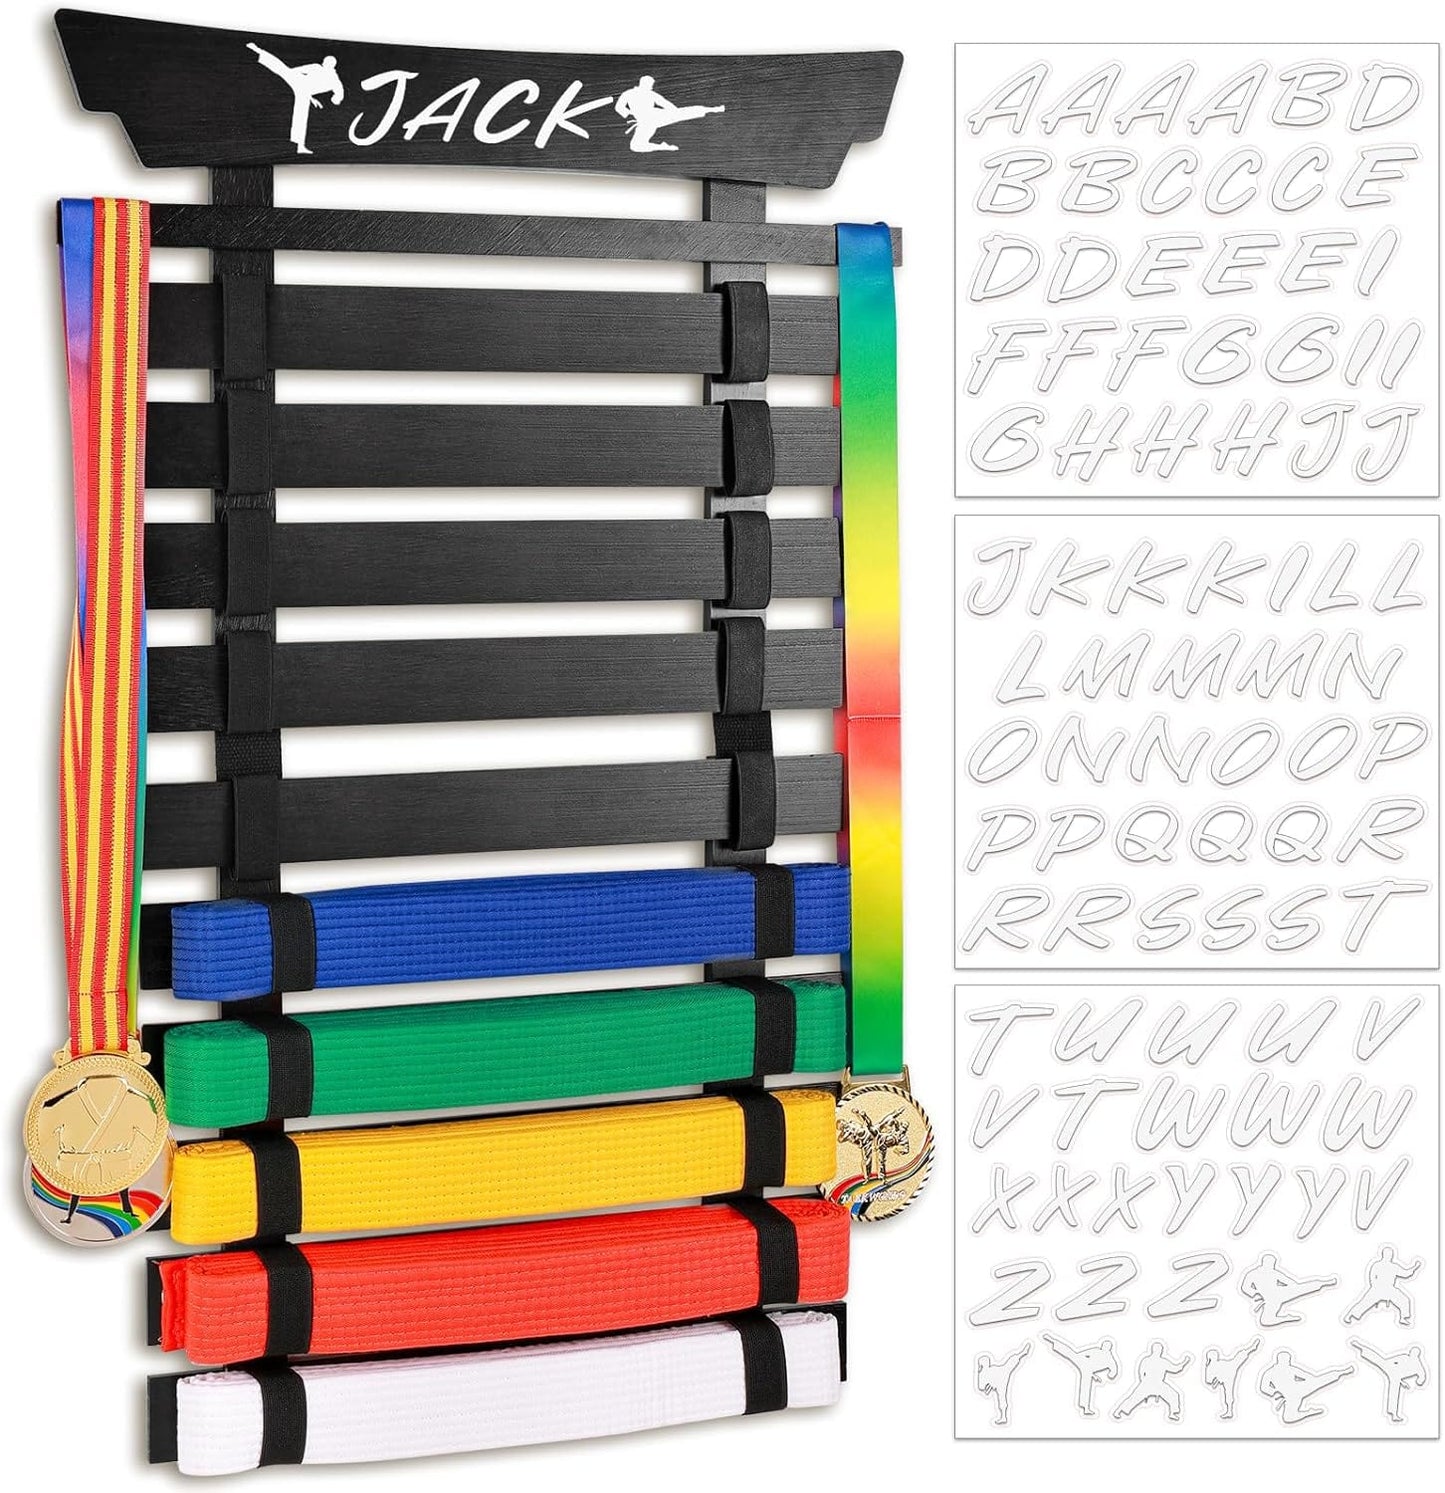 Eclipse Martial Art Supplies sporting goods Black 10 Belts Karate Belt Display Rack with Stickers, Taekwondo Belt Display Holder, Martial Arts Belt Display, No Assembly Required, BJJ Hanging Holder for Kids and Adult